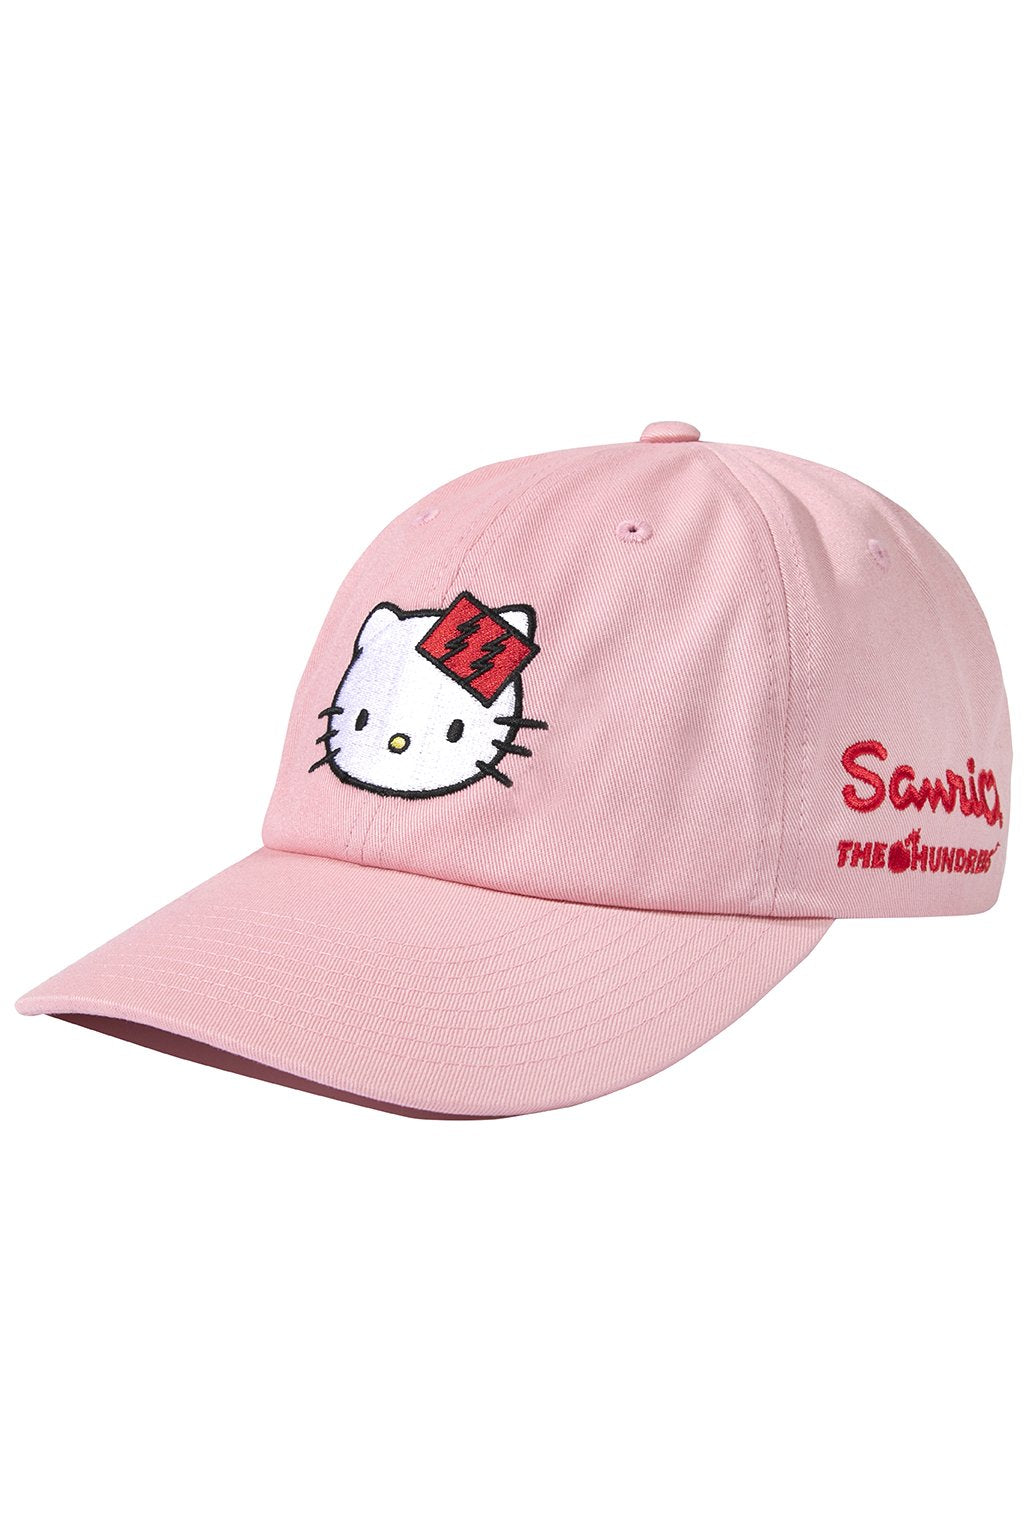 The Hundreds x Sanrio Hello Kitty Dad Hat in Pink